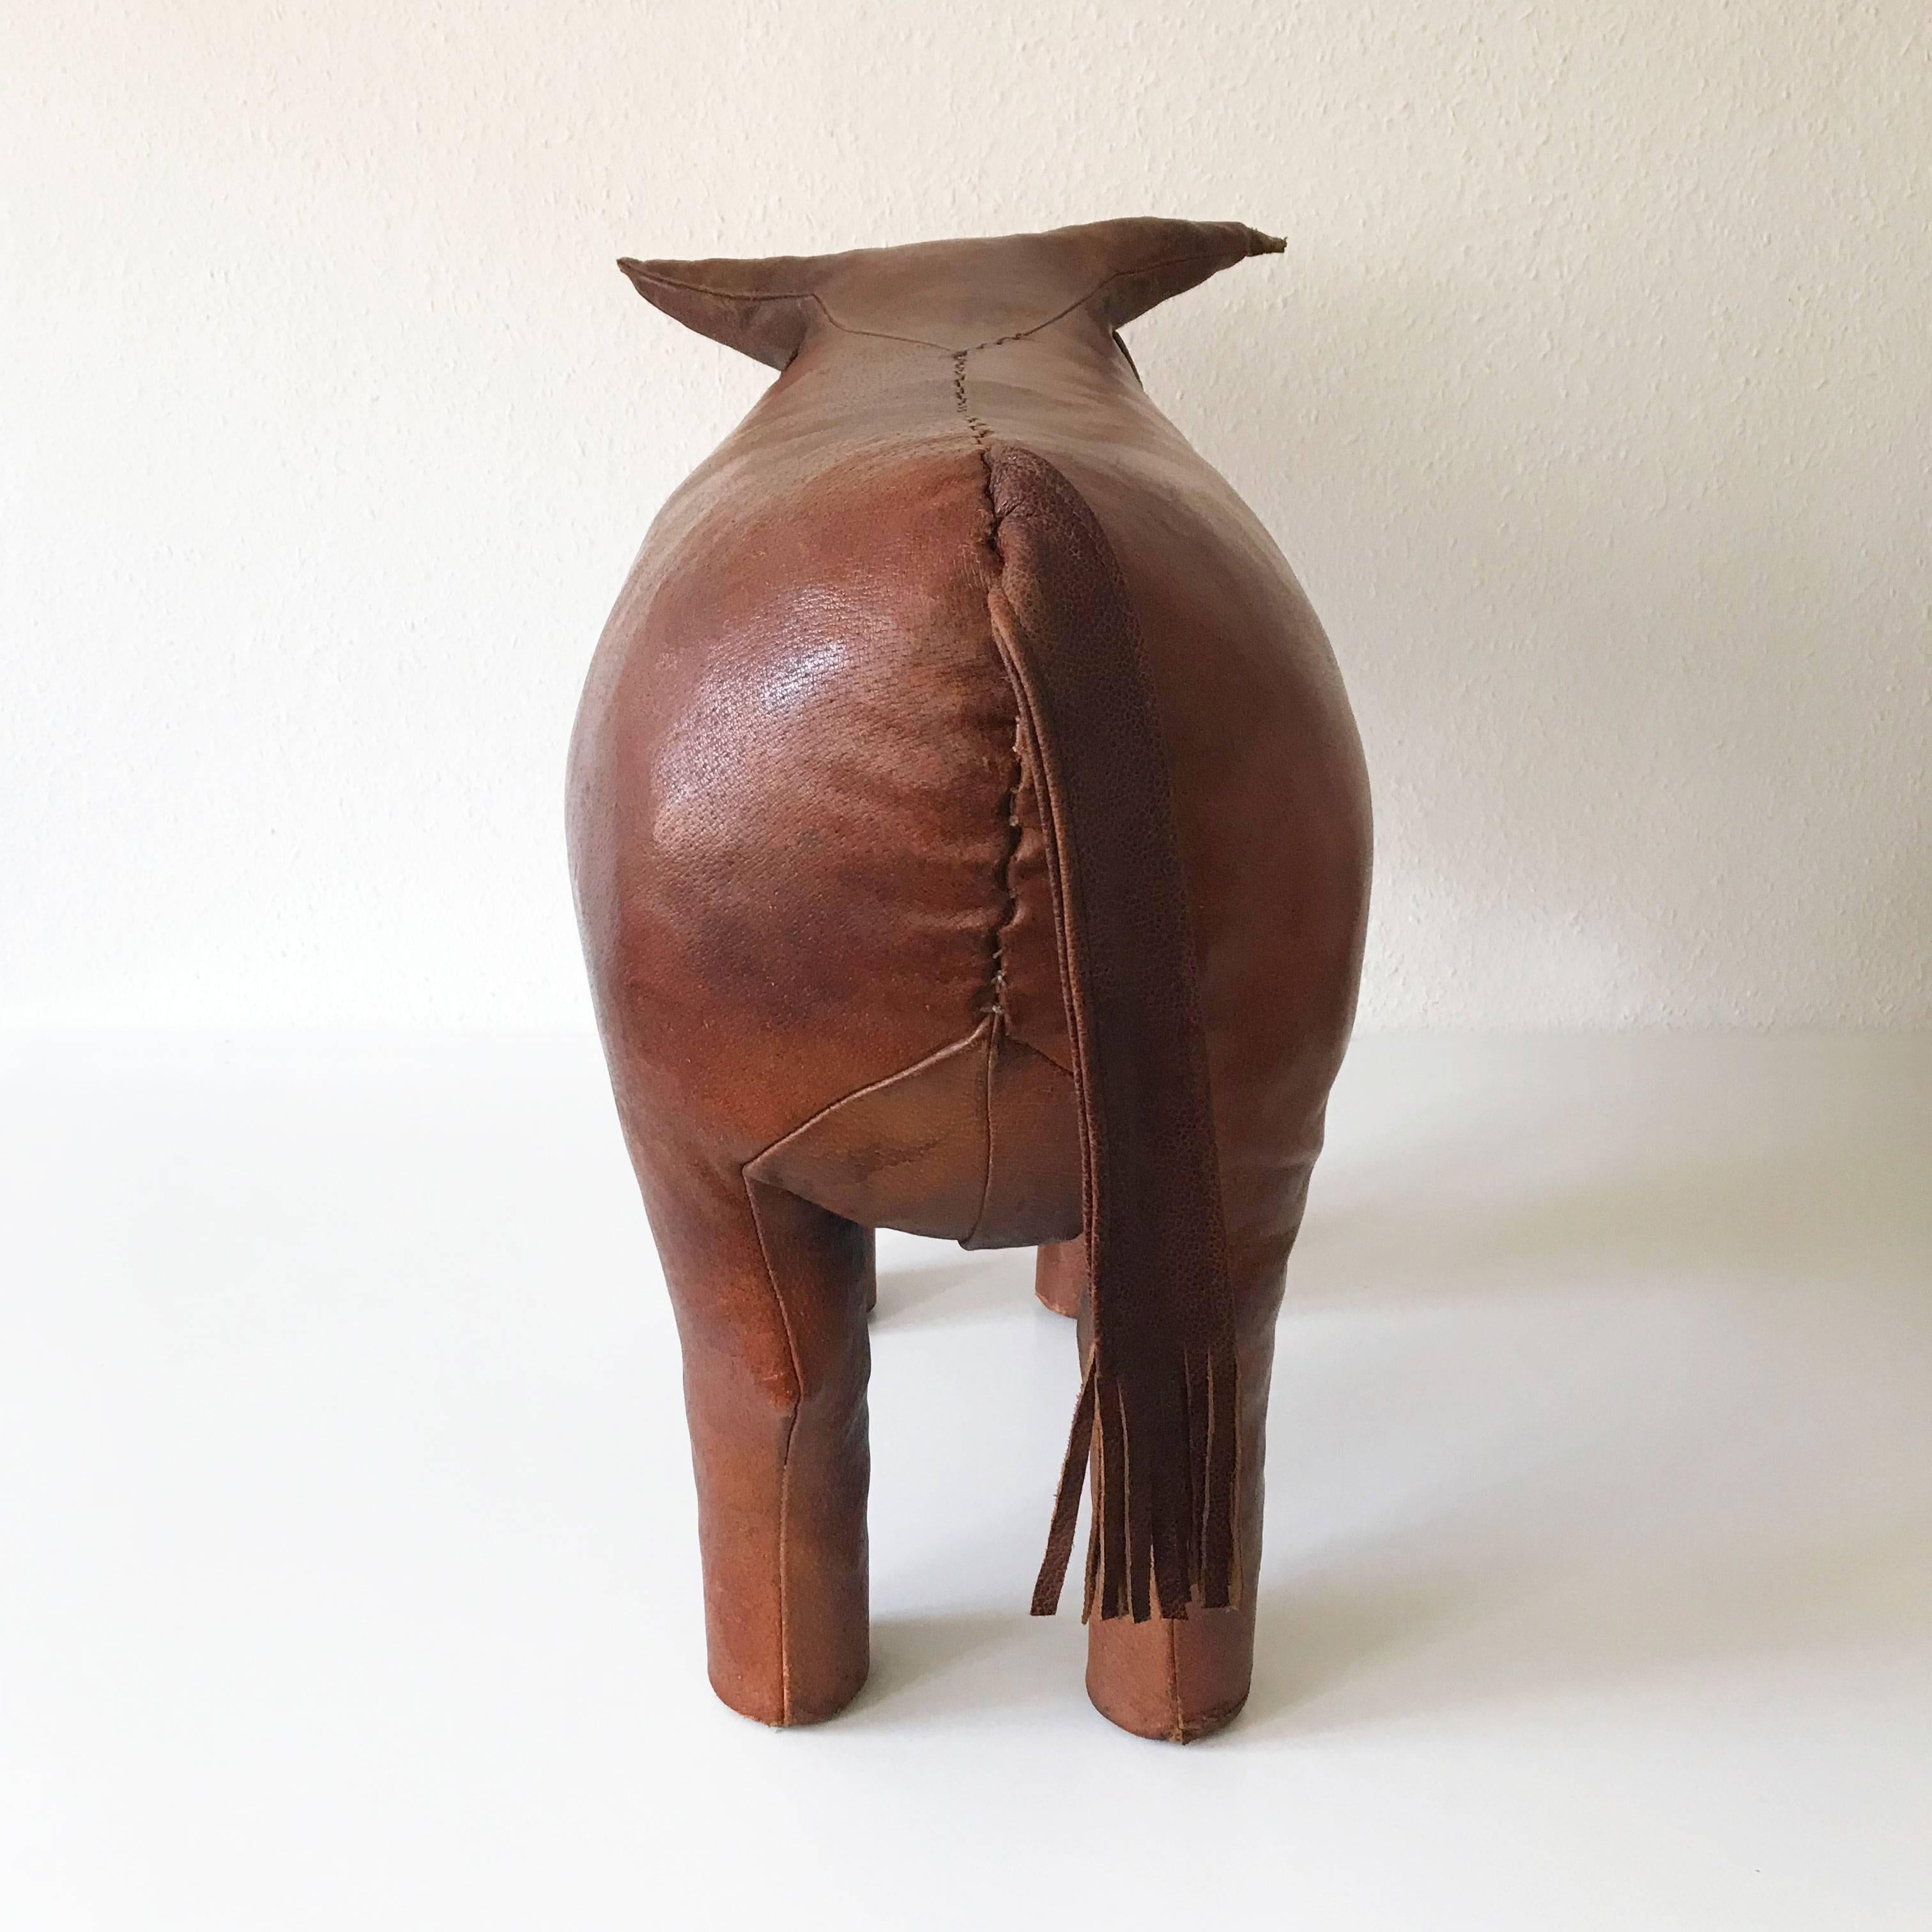 Original Leather Bull Footstool or Ottoman by Dimitri Omersa, 1960s, England 3